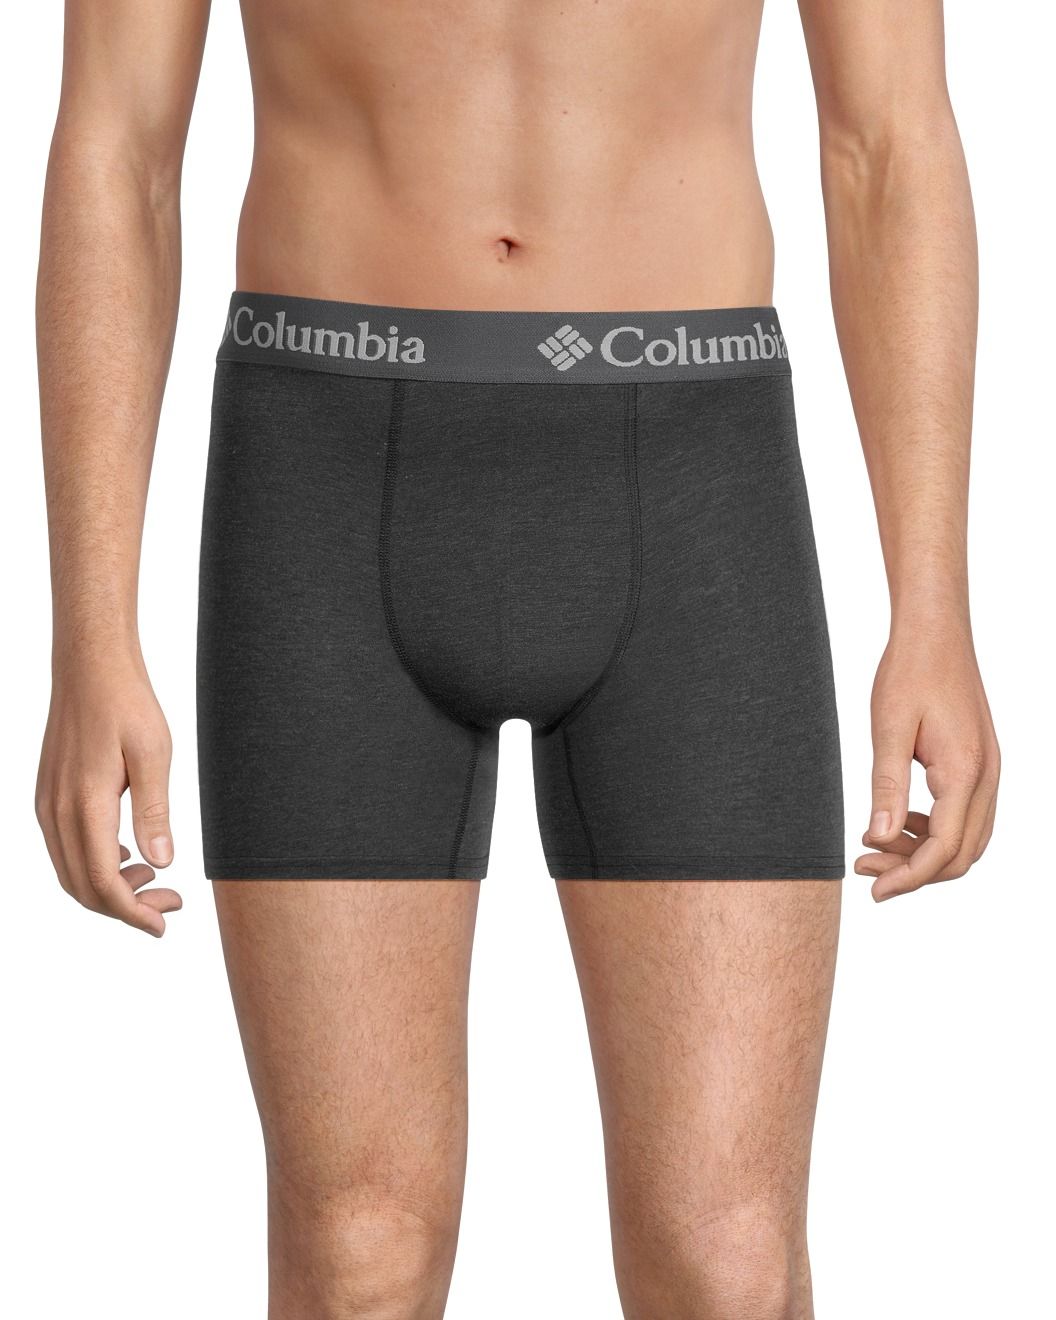 COLUMBIA 3 Pack HIGH-PERFORMANCE Stretch Boxer Briefs RED/BLACK/GRAY Men's  XL